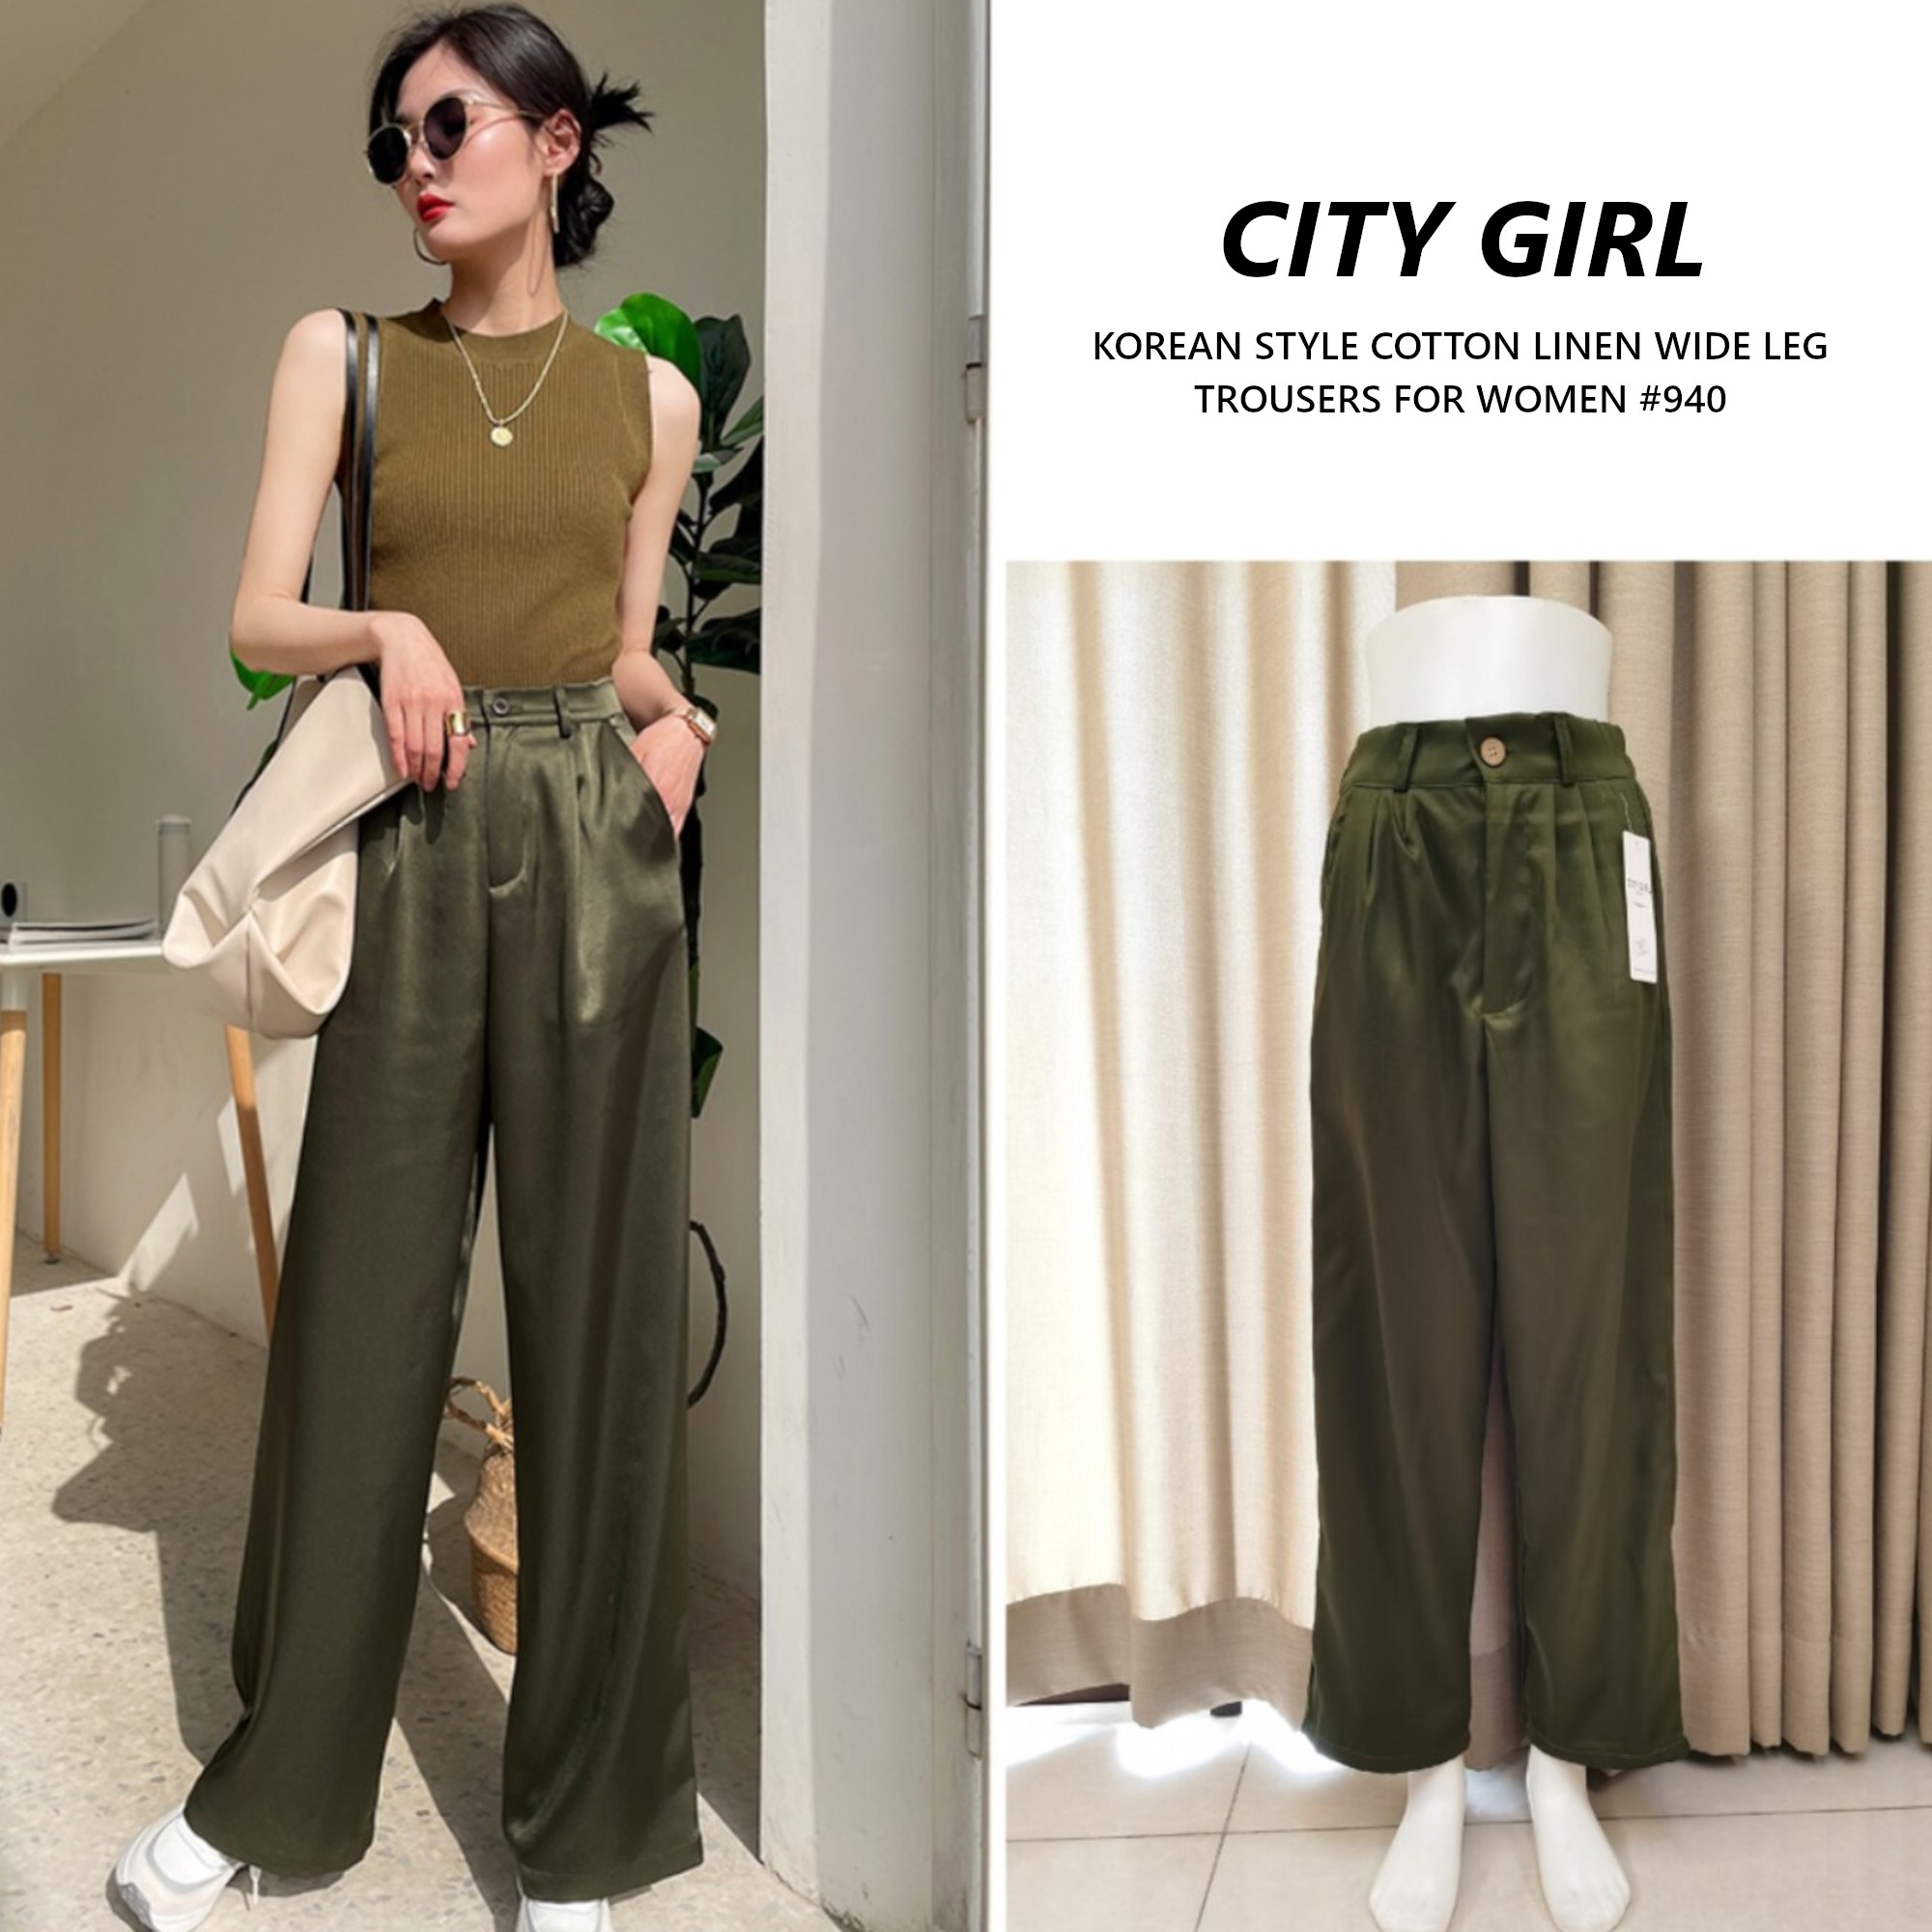 CITY GIRL Smooth texture high waist trousers drape loose and